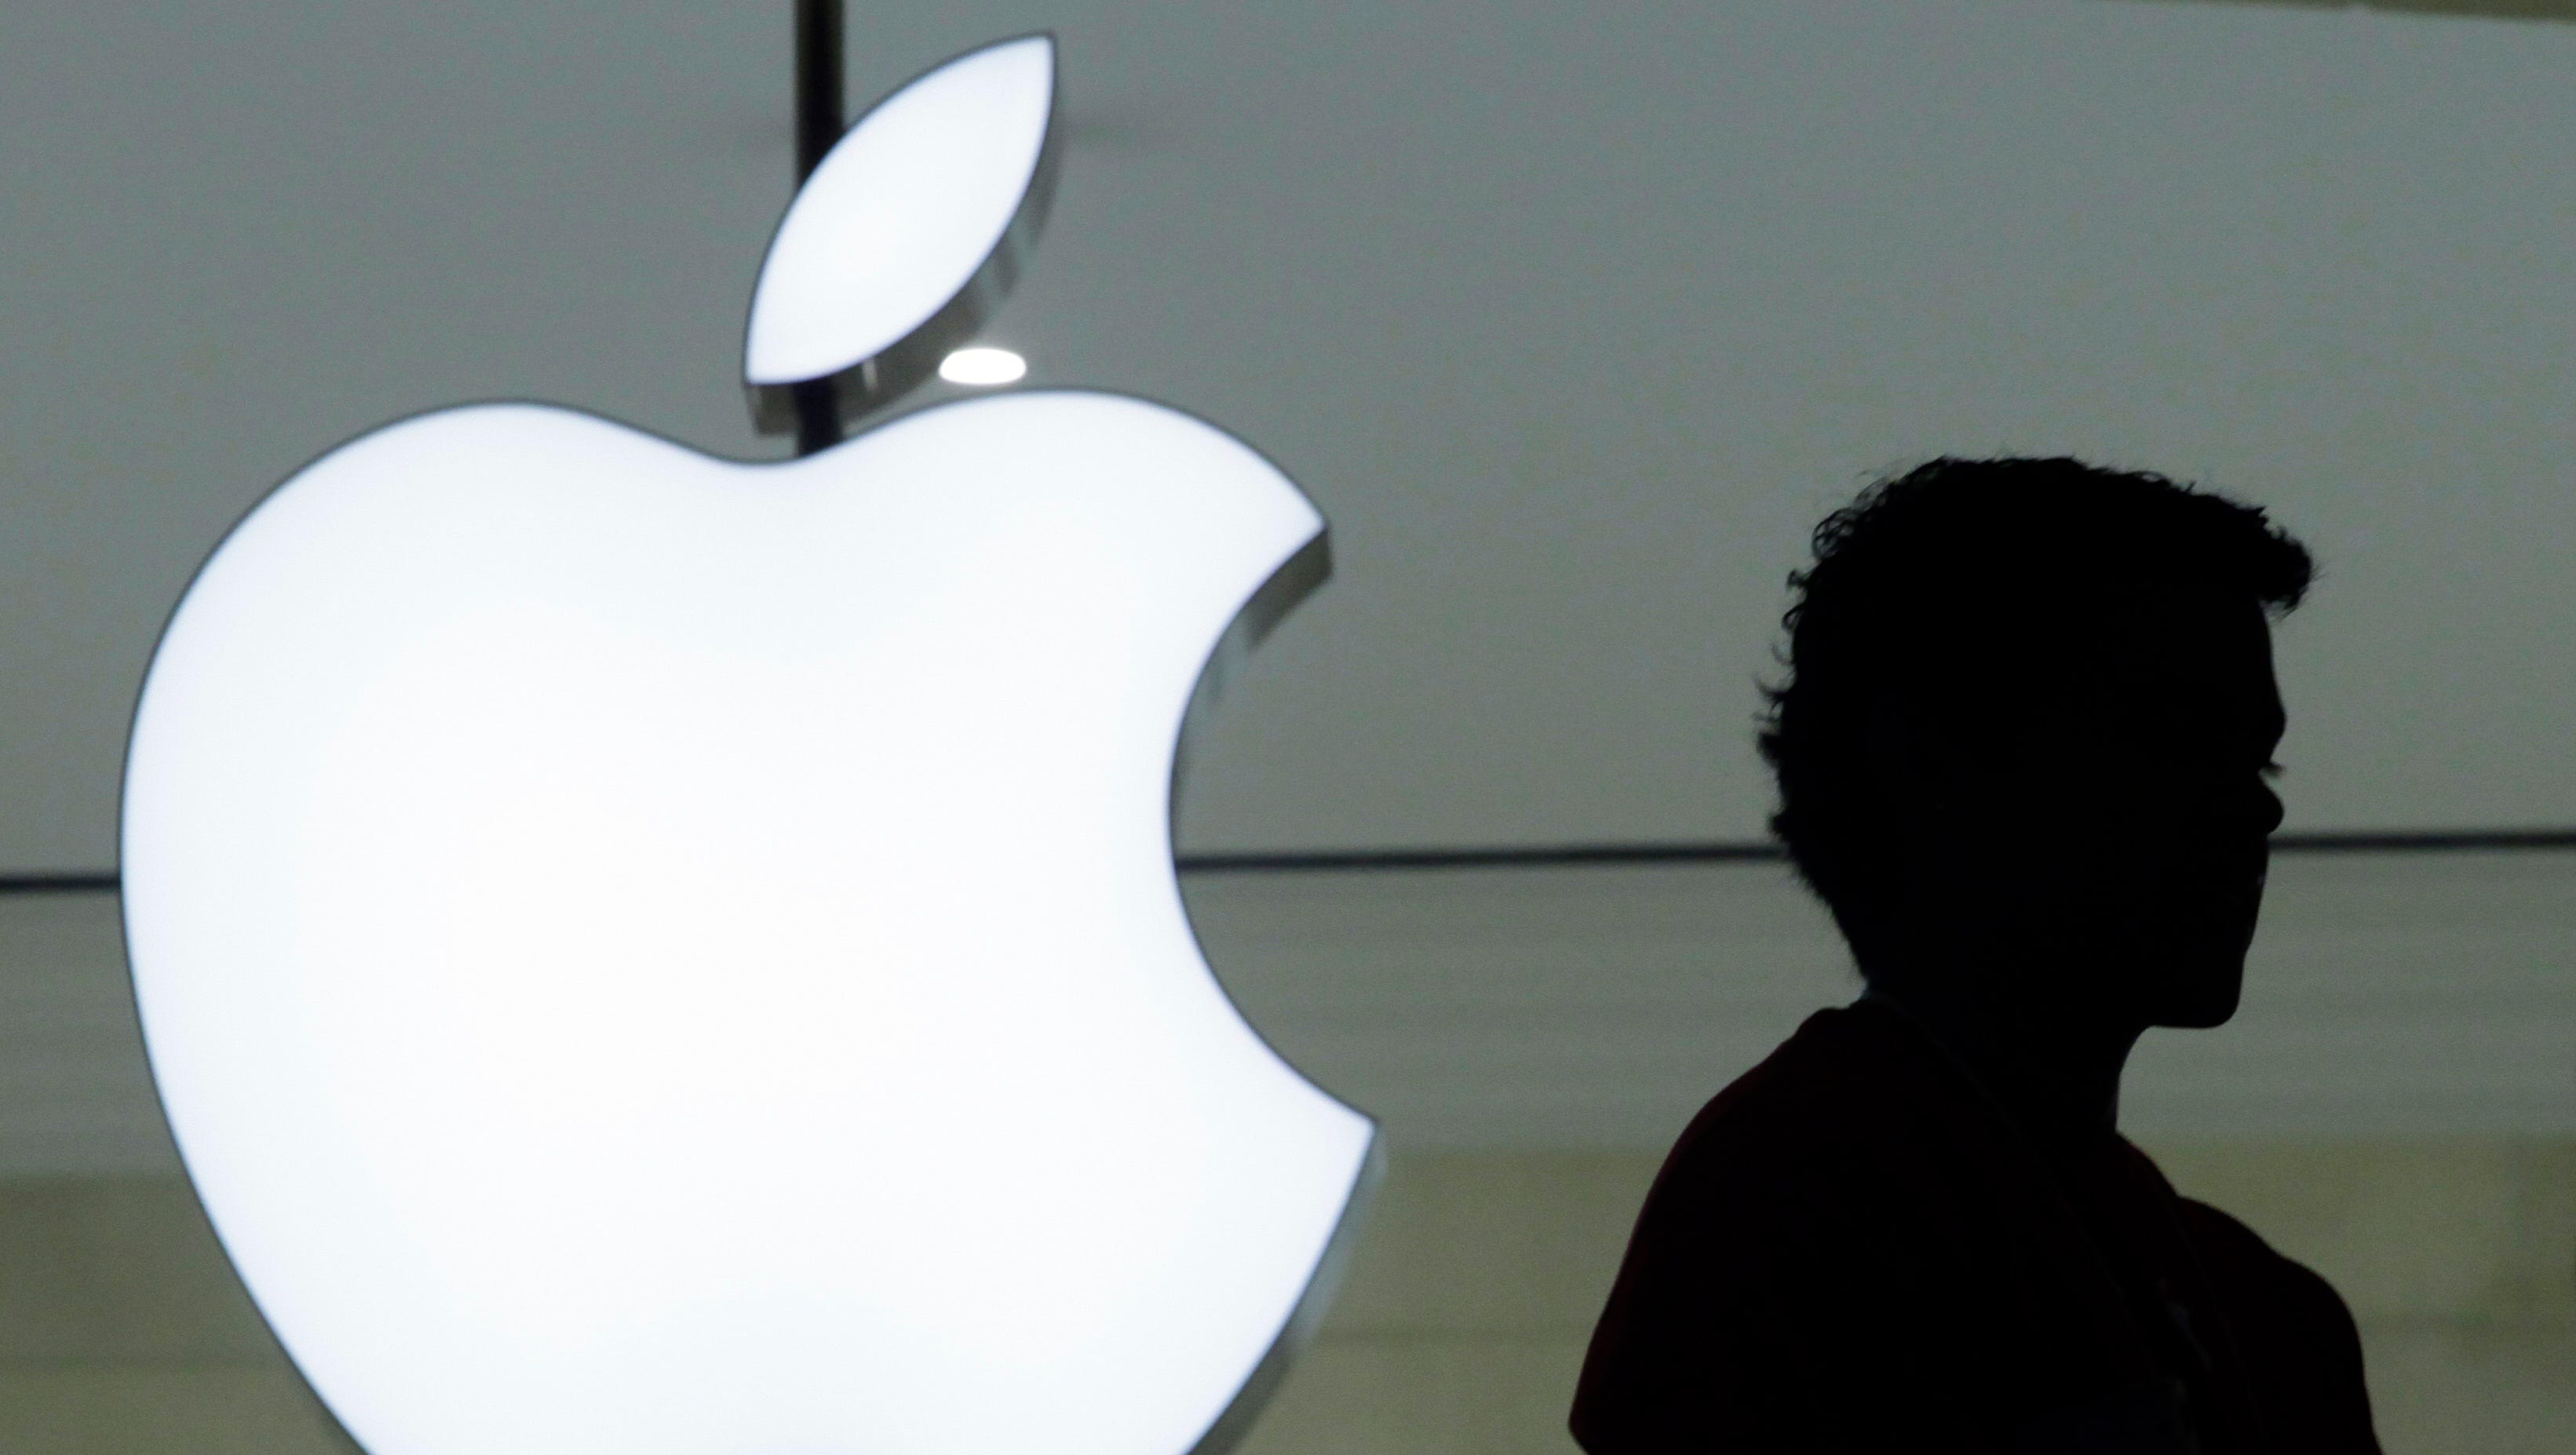 In this Dec. 7, 2011 file photo, a person stands near the Apple logo at the company's store in Grand Central Terminal, in New York.